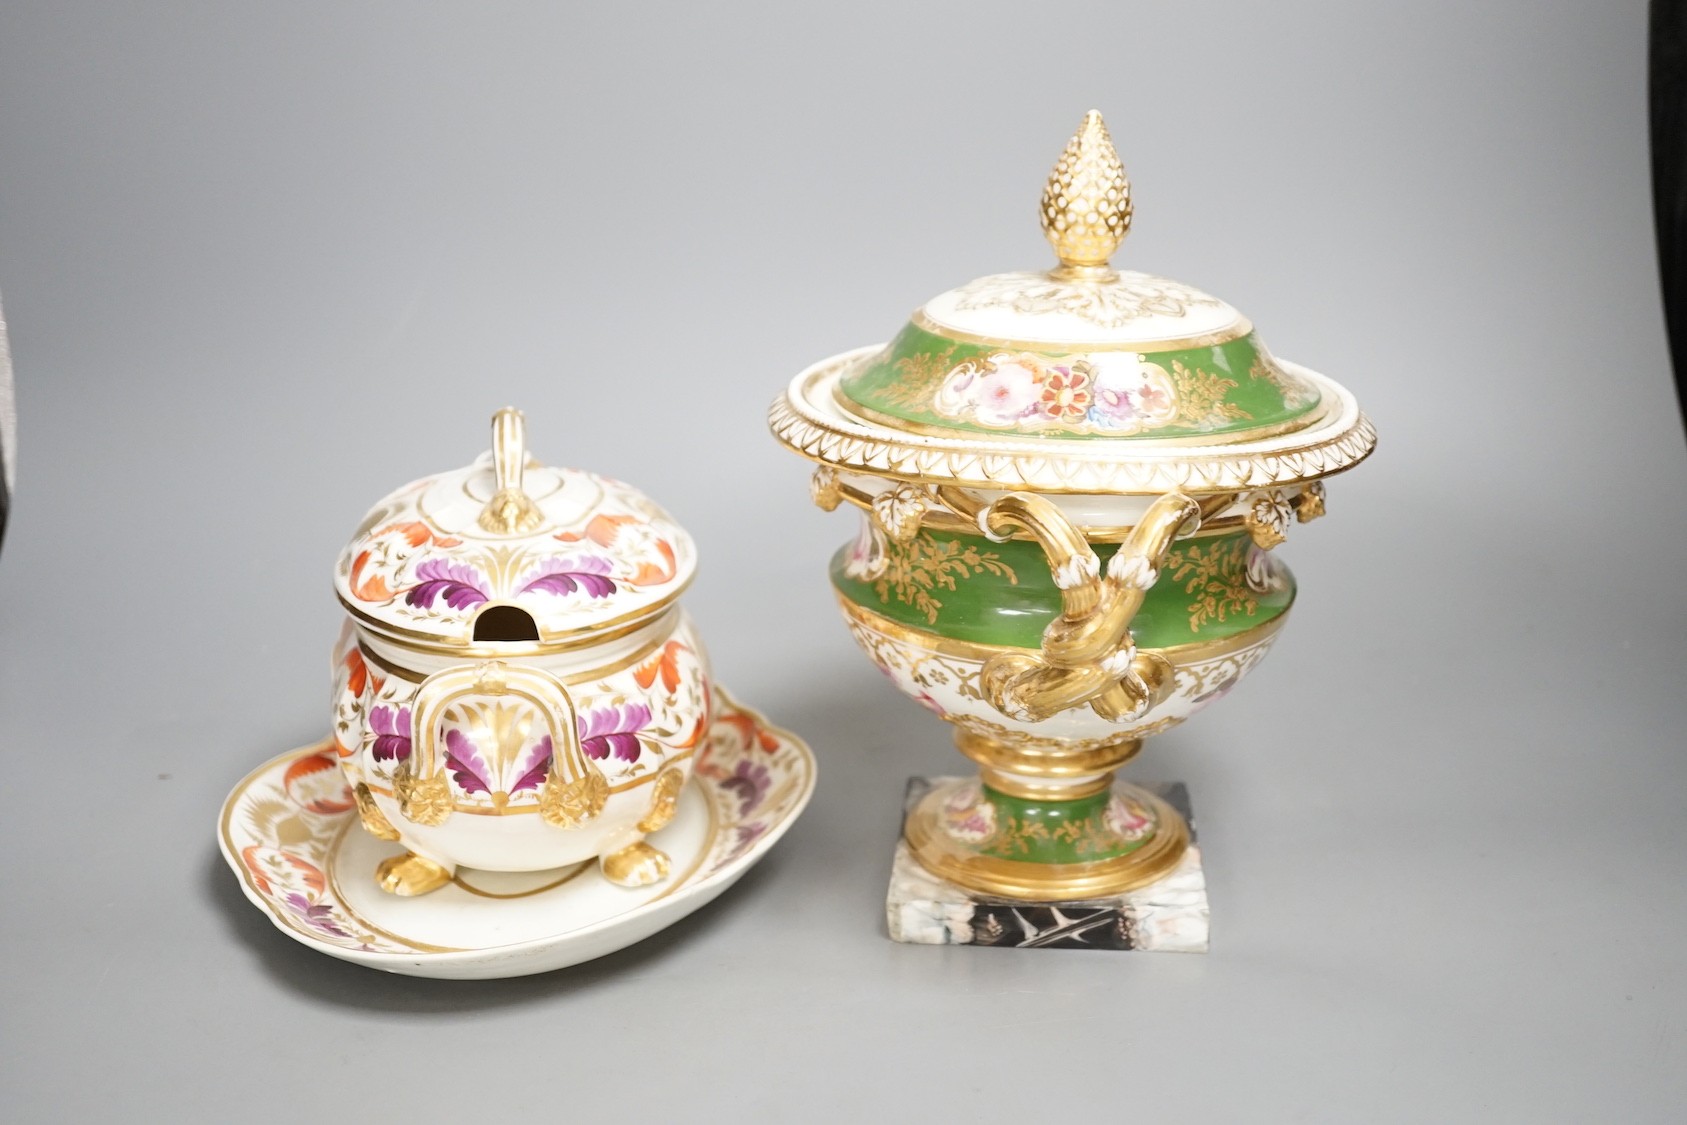 A small Derby tureen cover and stand, c.1825, 22 cm wide, and an English porcelain floral ice pail and cover (lacking liner)